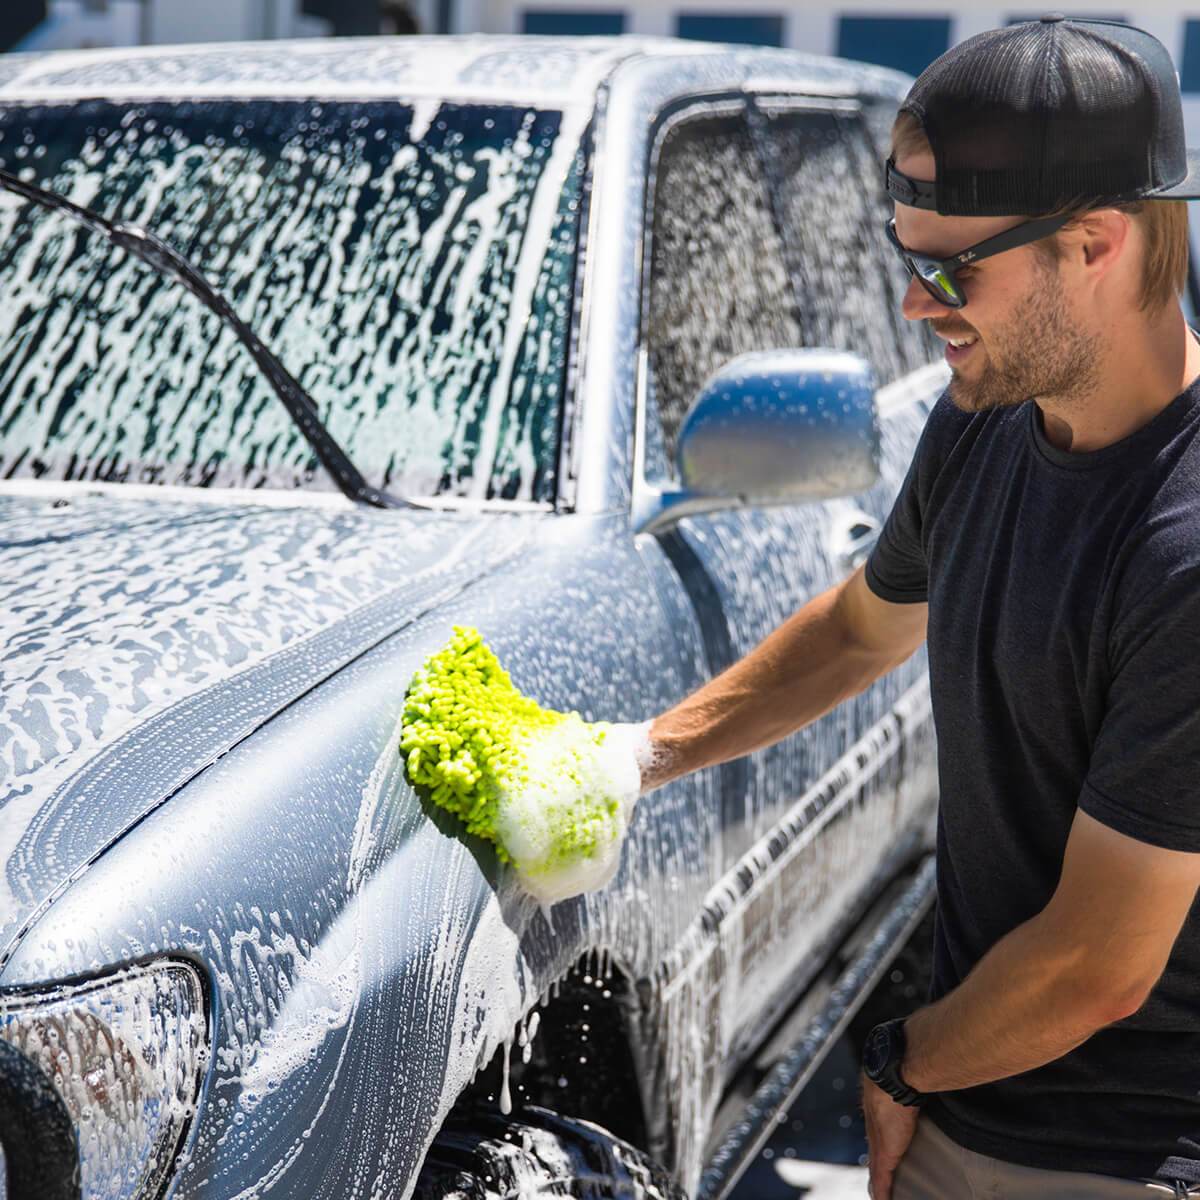 The Best Way to Wash Your Car